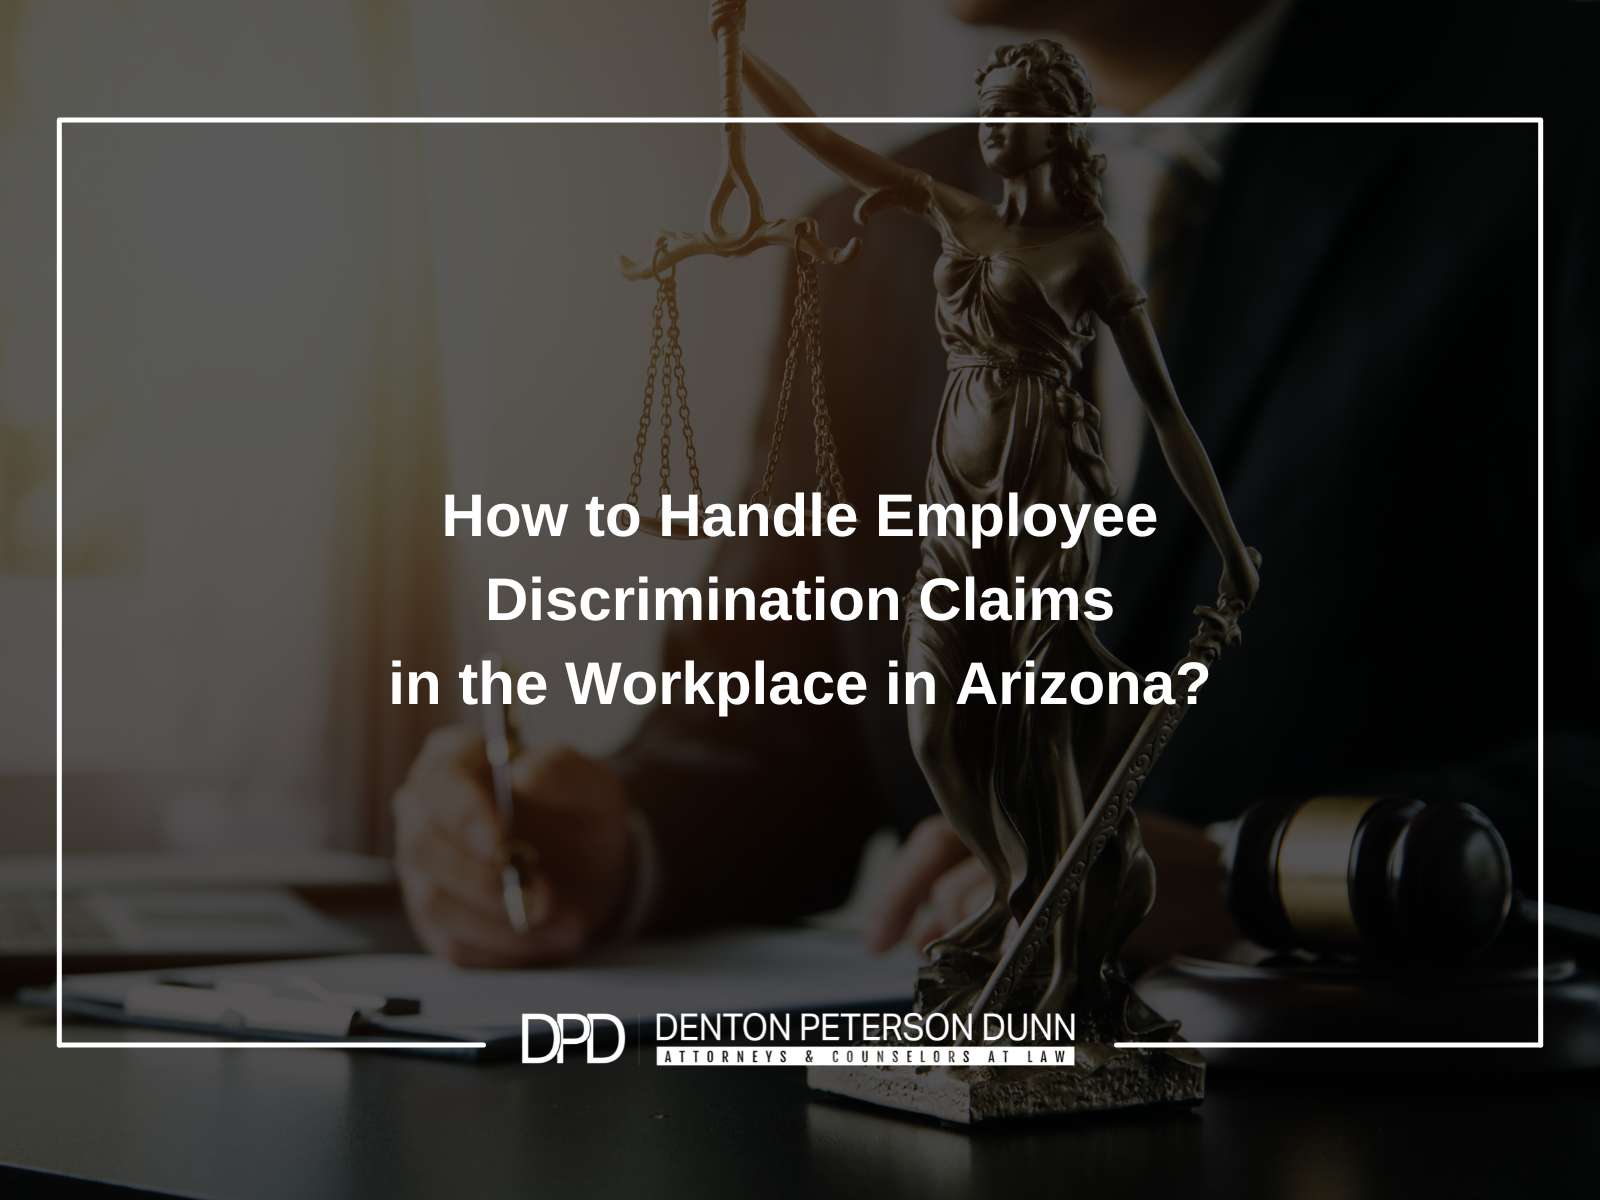 How to Handle Employee Discrimination Claims in the Workplace in Arizona?